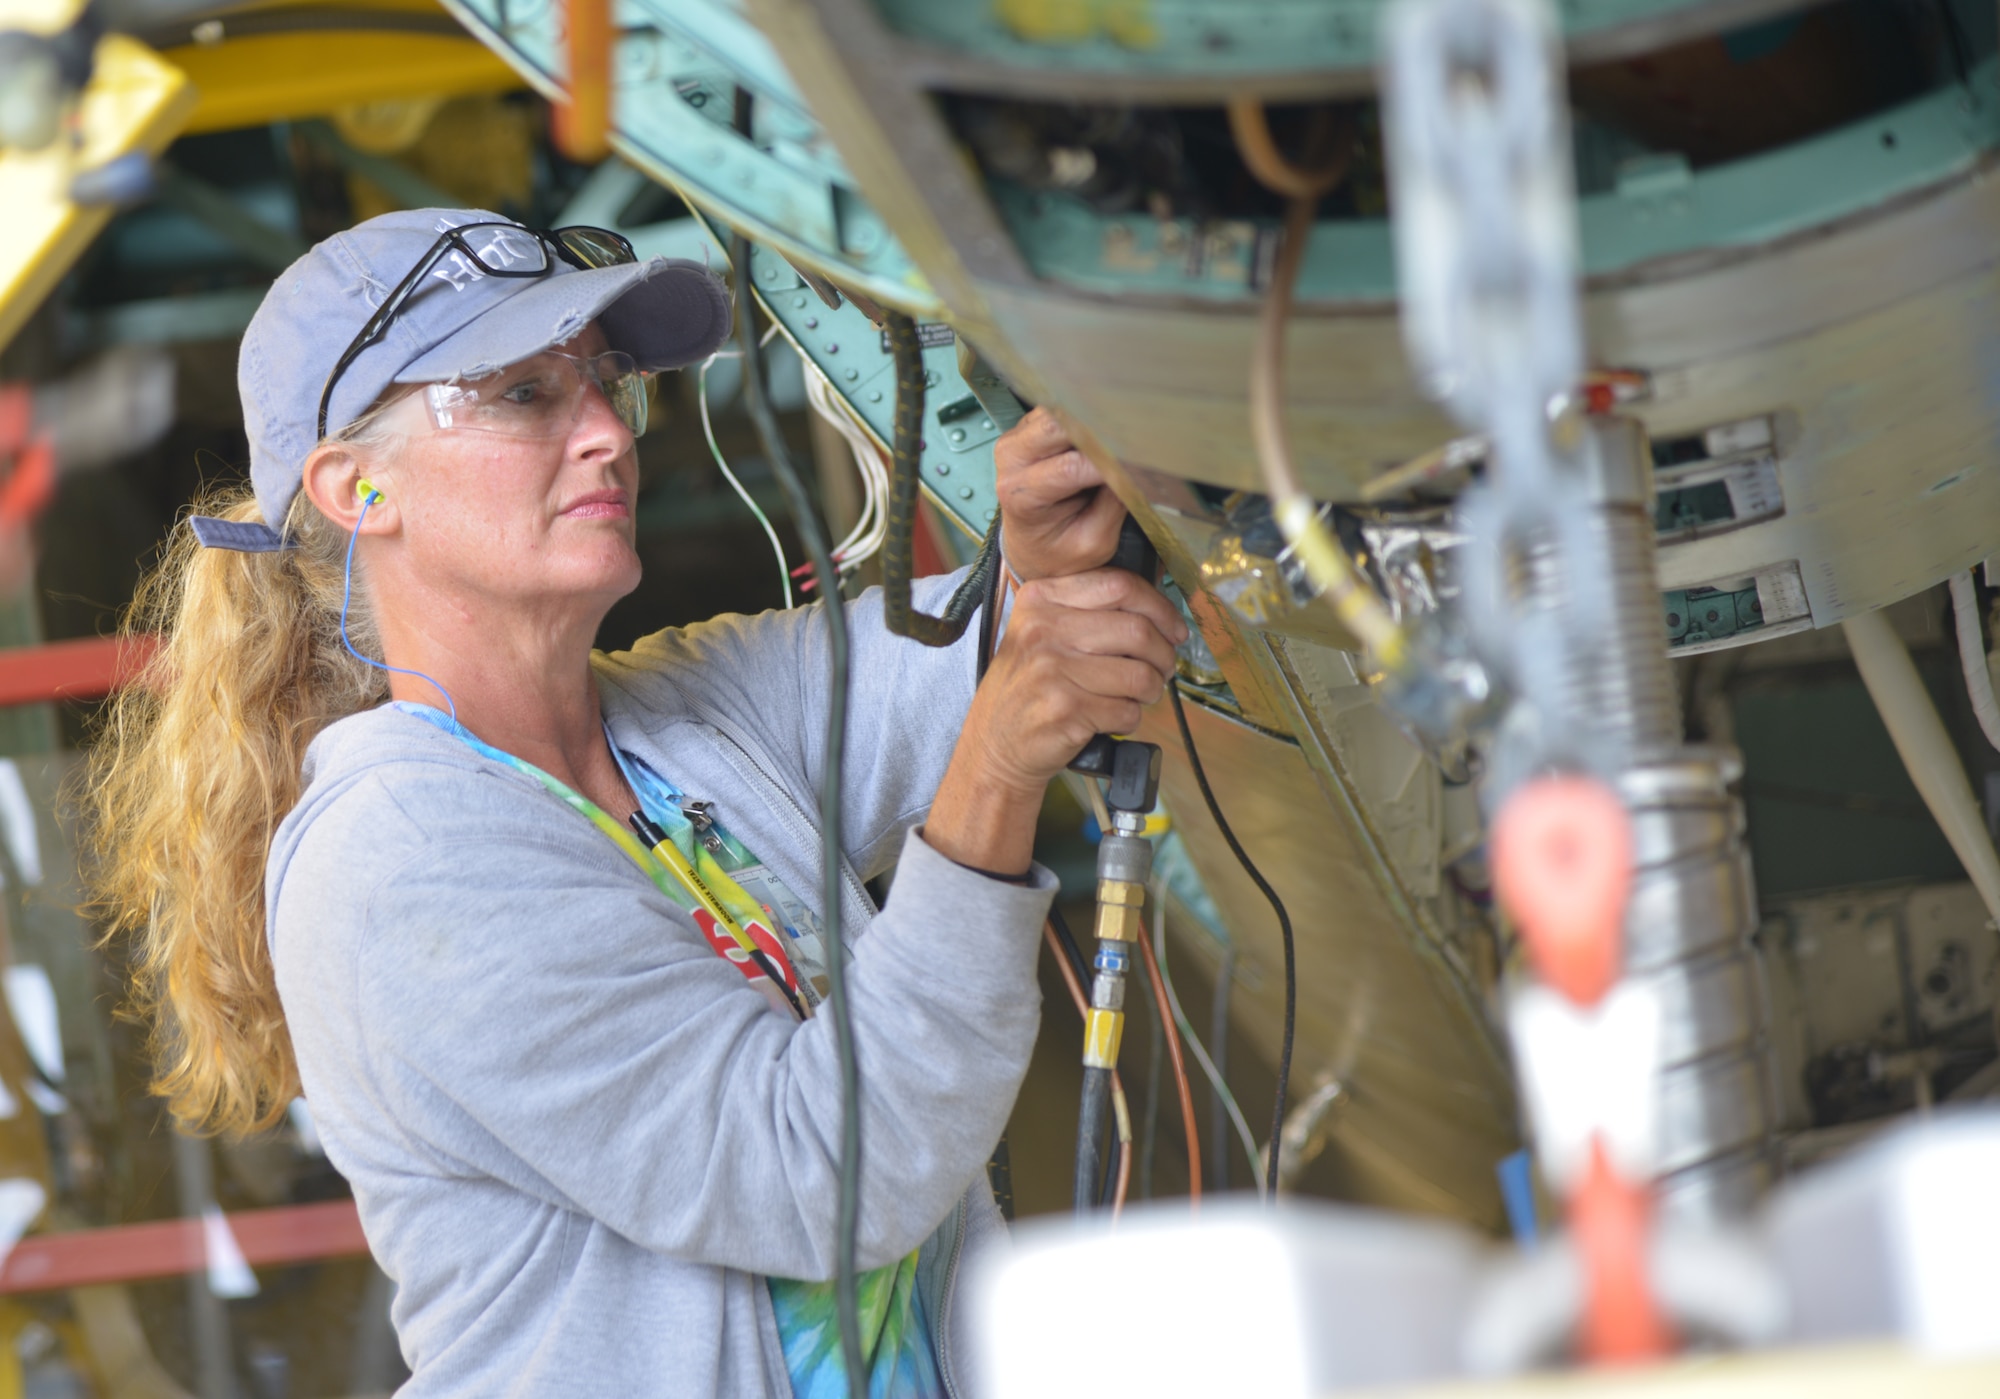 Ingrid Causey, 561st Aircraft Maintenance Squadron Rewire Flight electrician, unmounts jacks on one of the panel doors of the F-15. (U.S. Air Force photo by Ray Crayton)